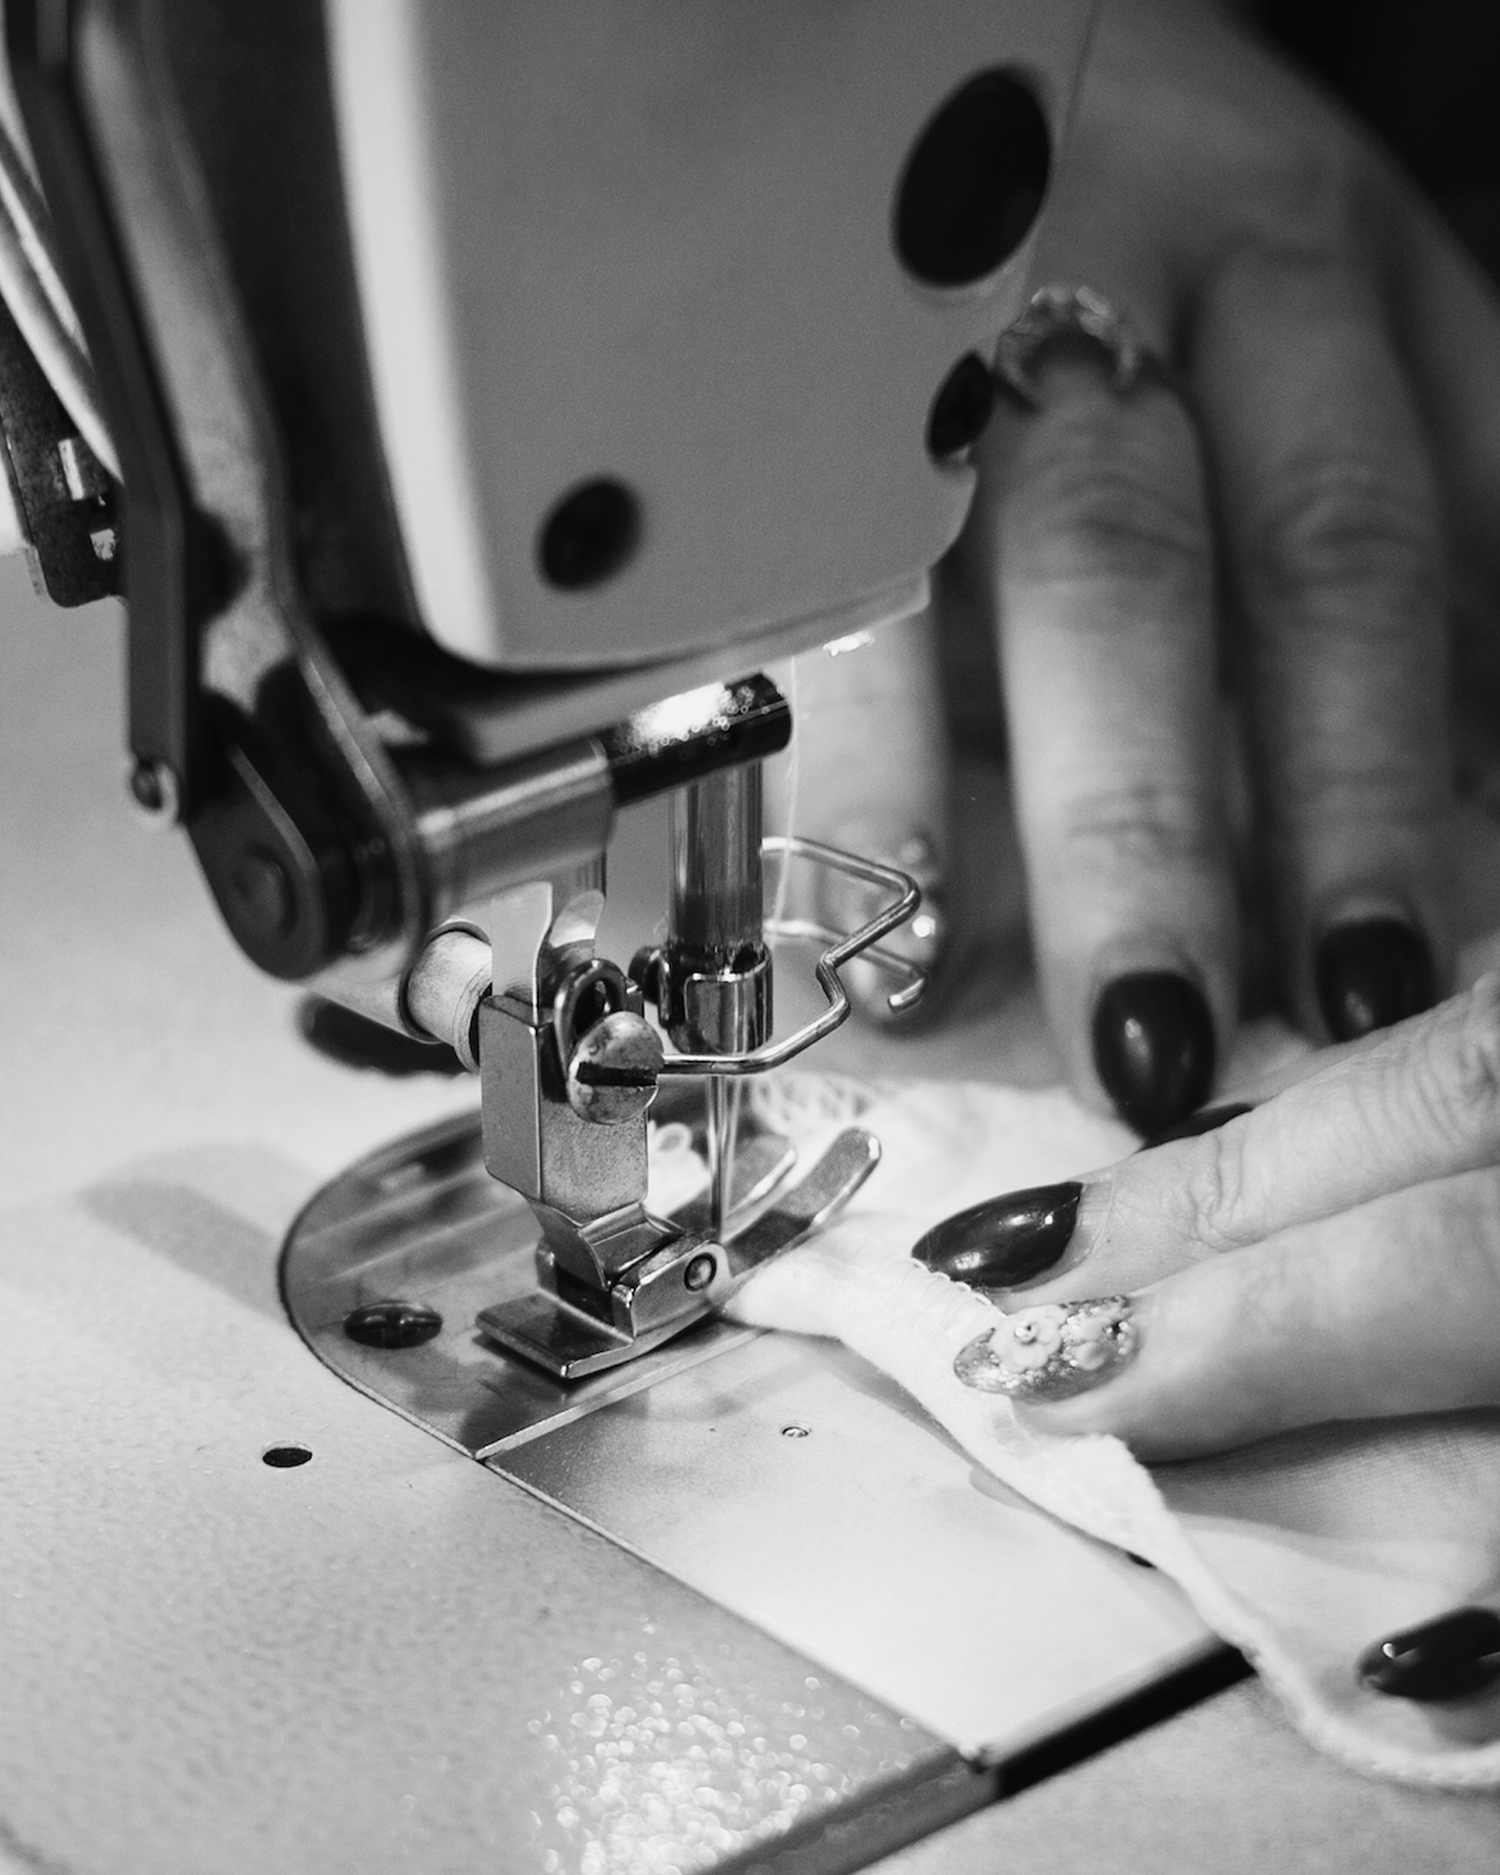 sewing-apprenticeships-fashion-enter-podcast.jpg